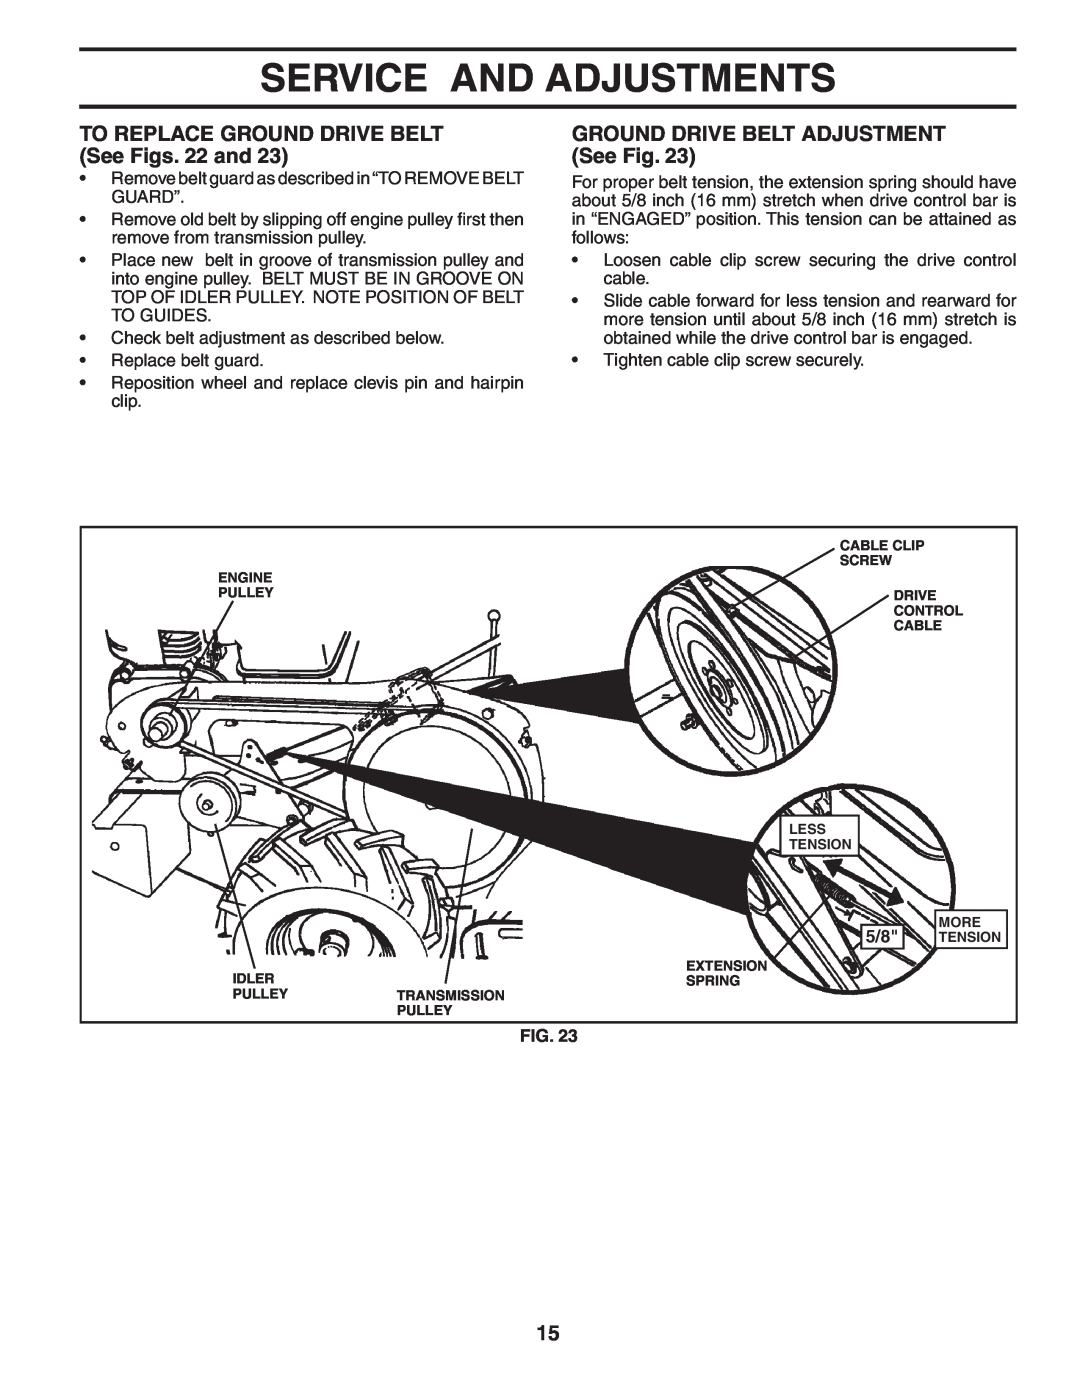 Poulan PRRT50 TO REPLACE GROUND DRIVE BELT See Figs. 22 and, GROUND DRIVE BELT ADJUSTMENT See Fig, Service And Adjustments 